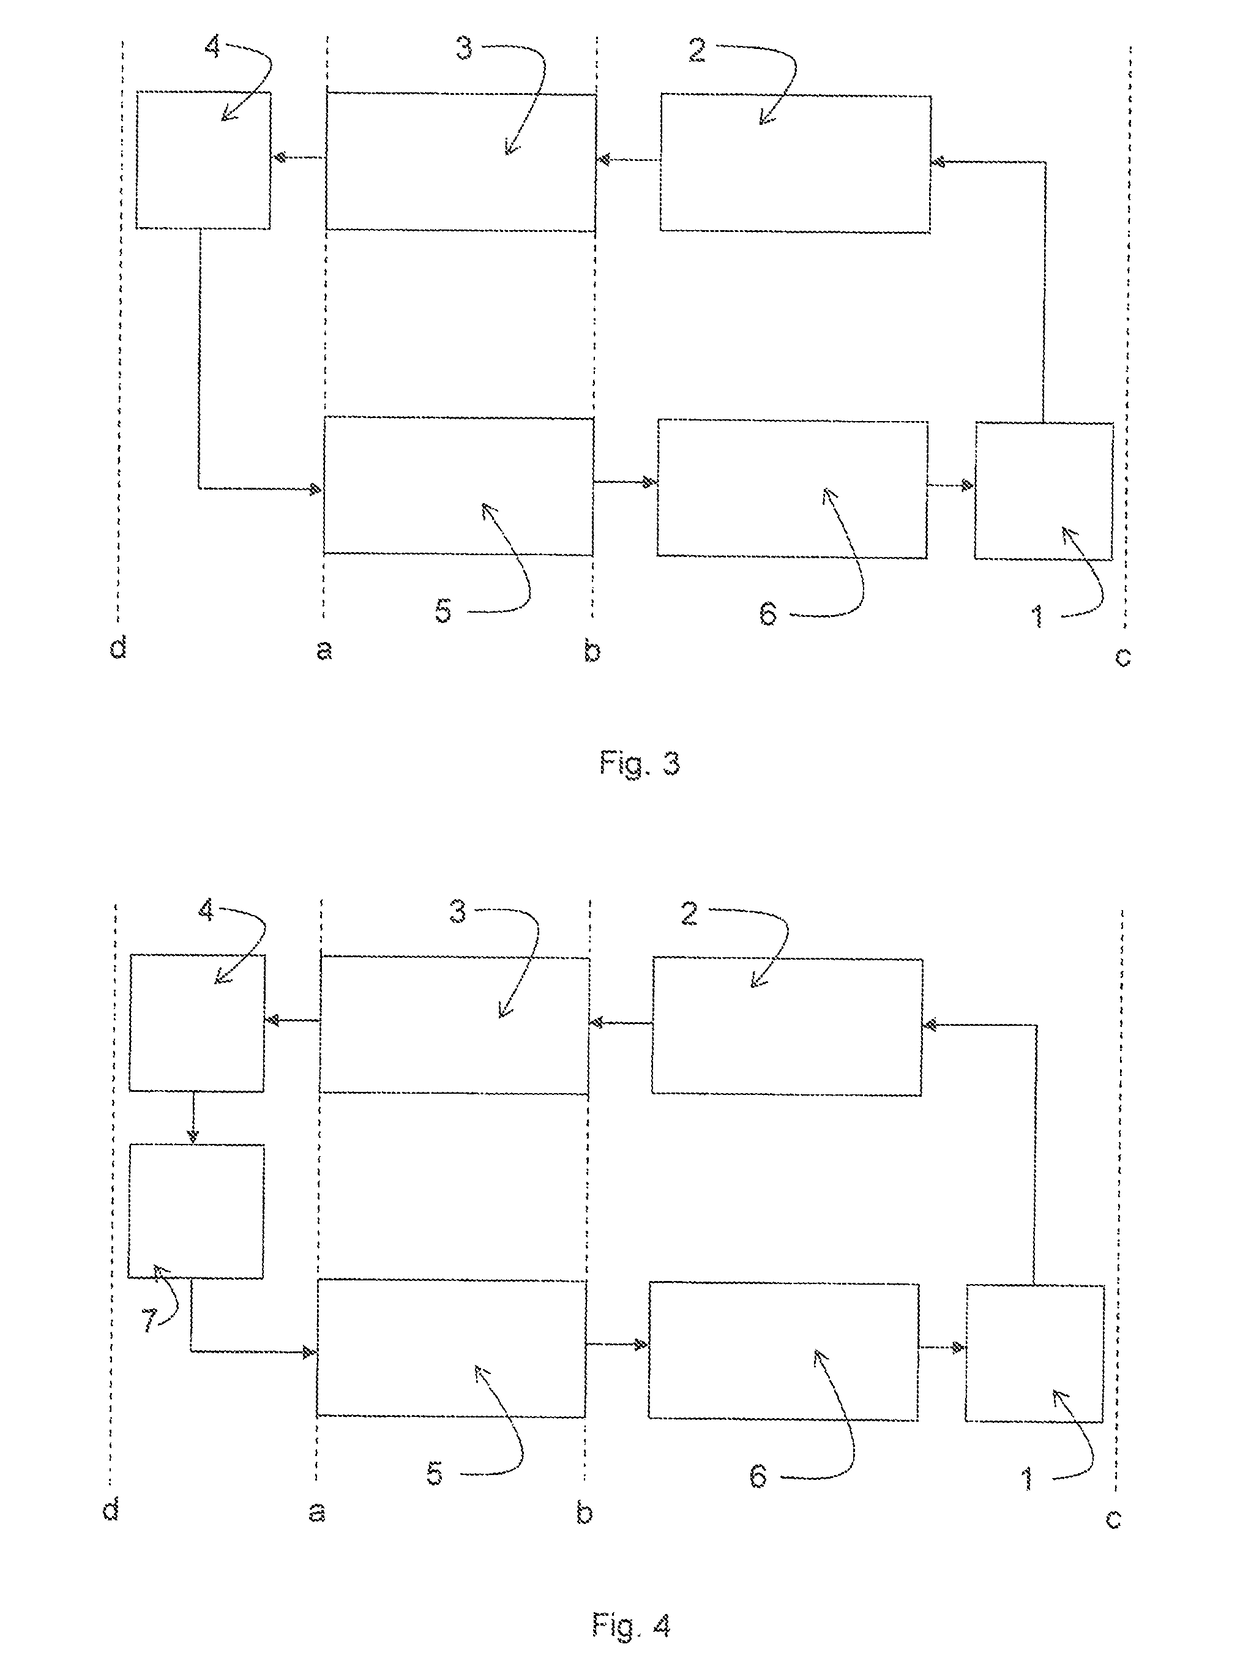 Method of providing inline sterile freeze drying of a product in trays accommodated in a trolley, system for carrying out the method, and use of the method